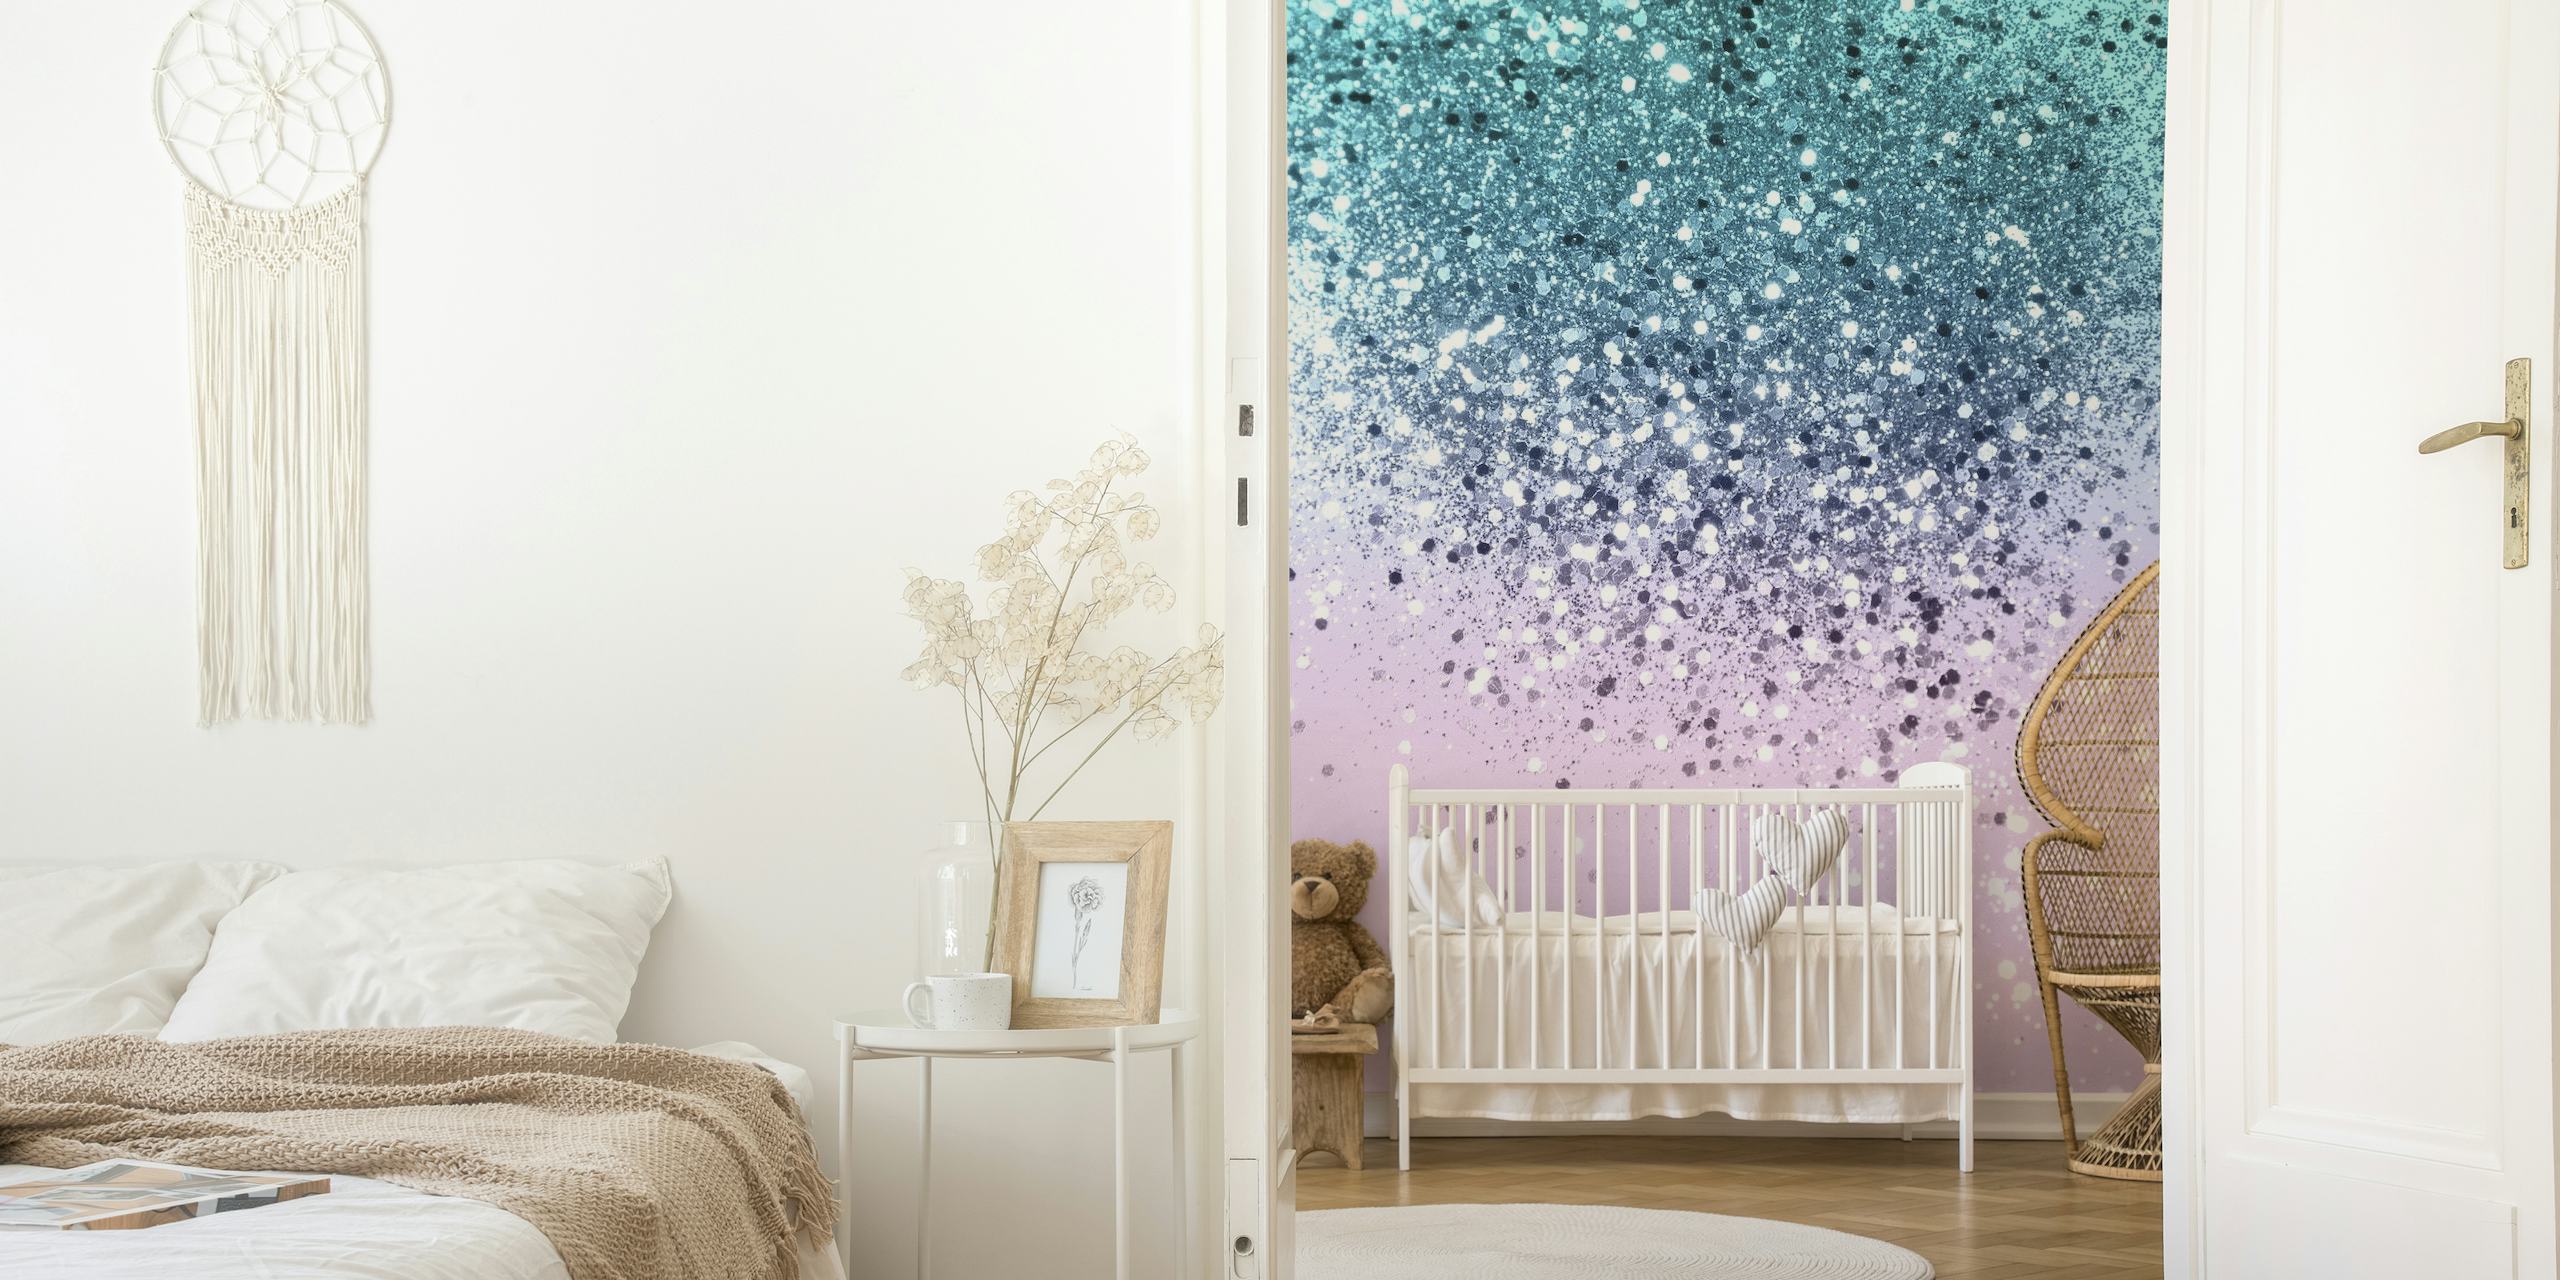 Gradient turquoise to pink wall mural with glitter effect named Unicorn Princess Glitter 2.